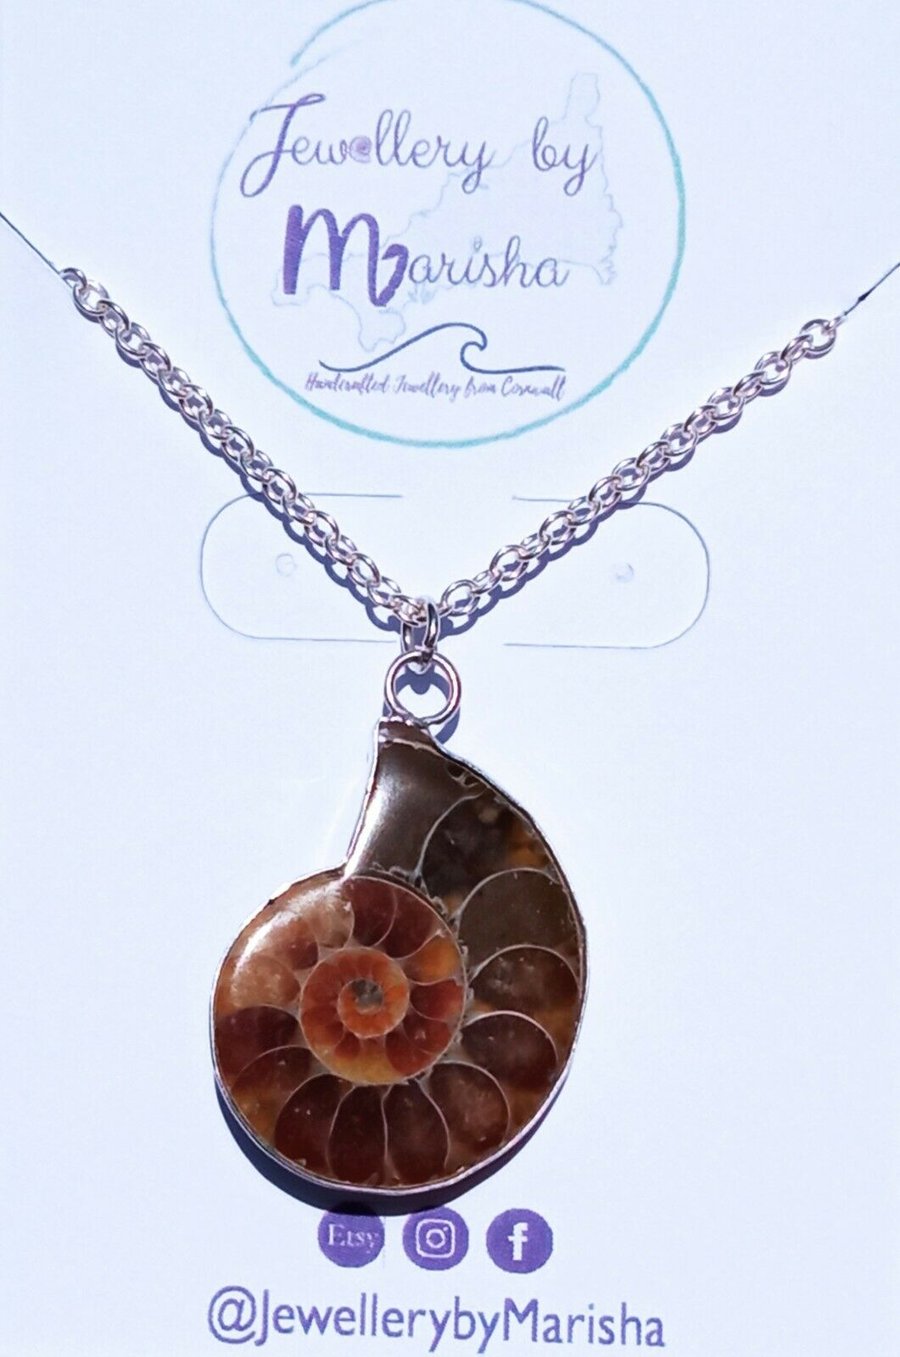 Fine Silver & Recycled Sterling Silver Reiki Healing Ammonite Fossil Necklace